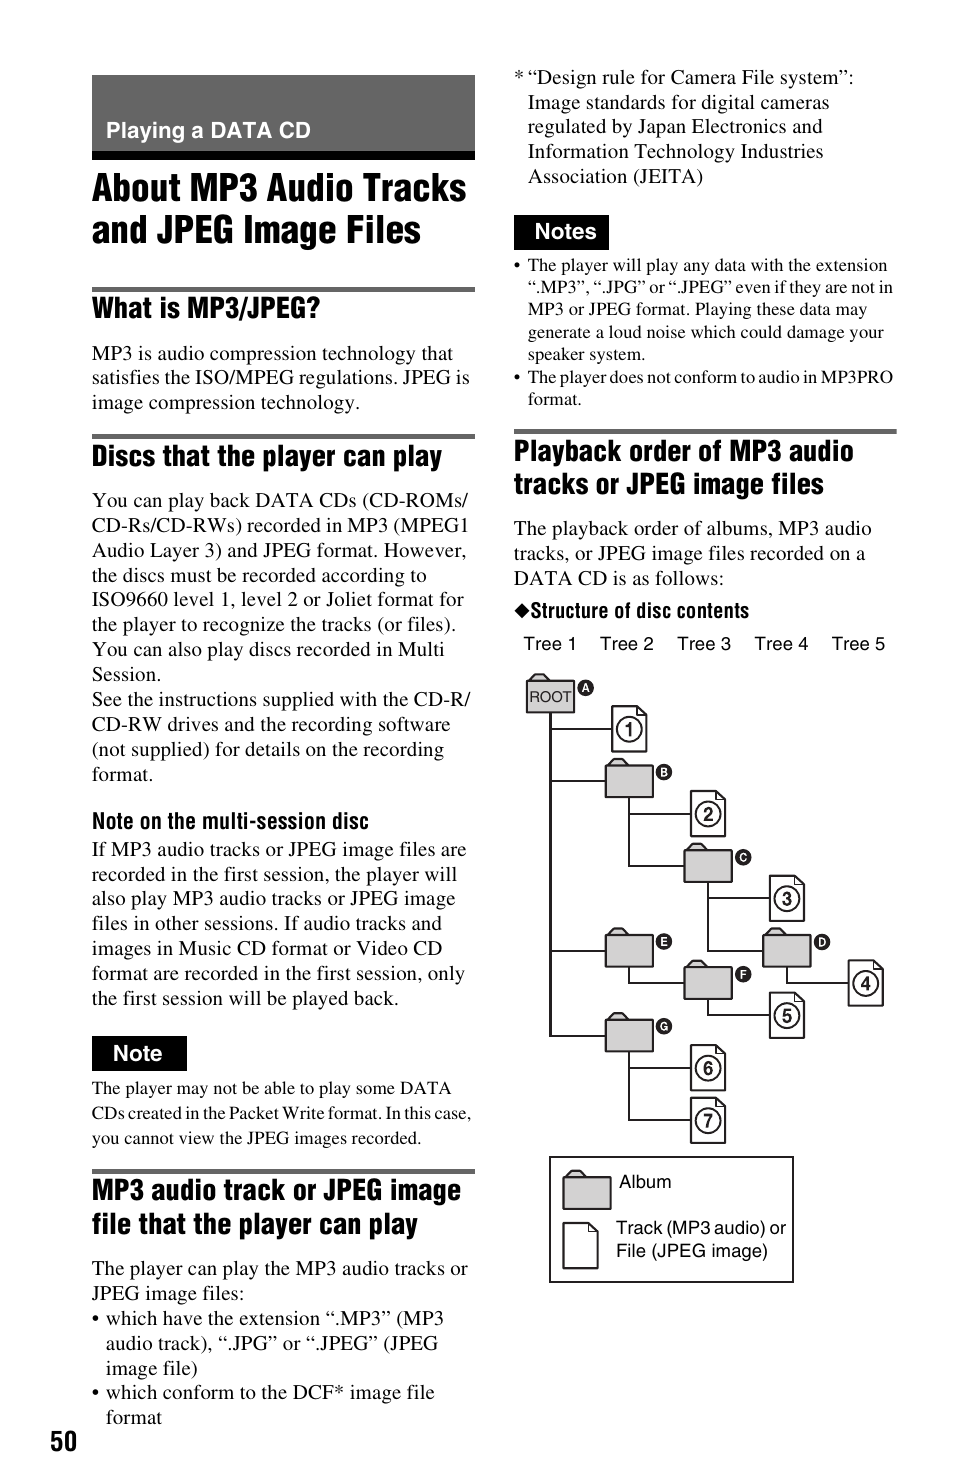 Playing a data cd, About mp3 audio tracks and jpeg image files, What is mp3/jpeg | Discs that the player can play | Sony DVP-NS501P User Manual | Page 50 / 80